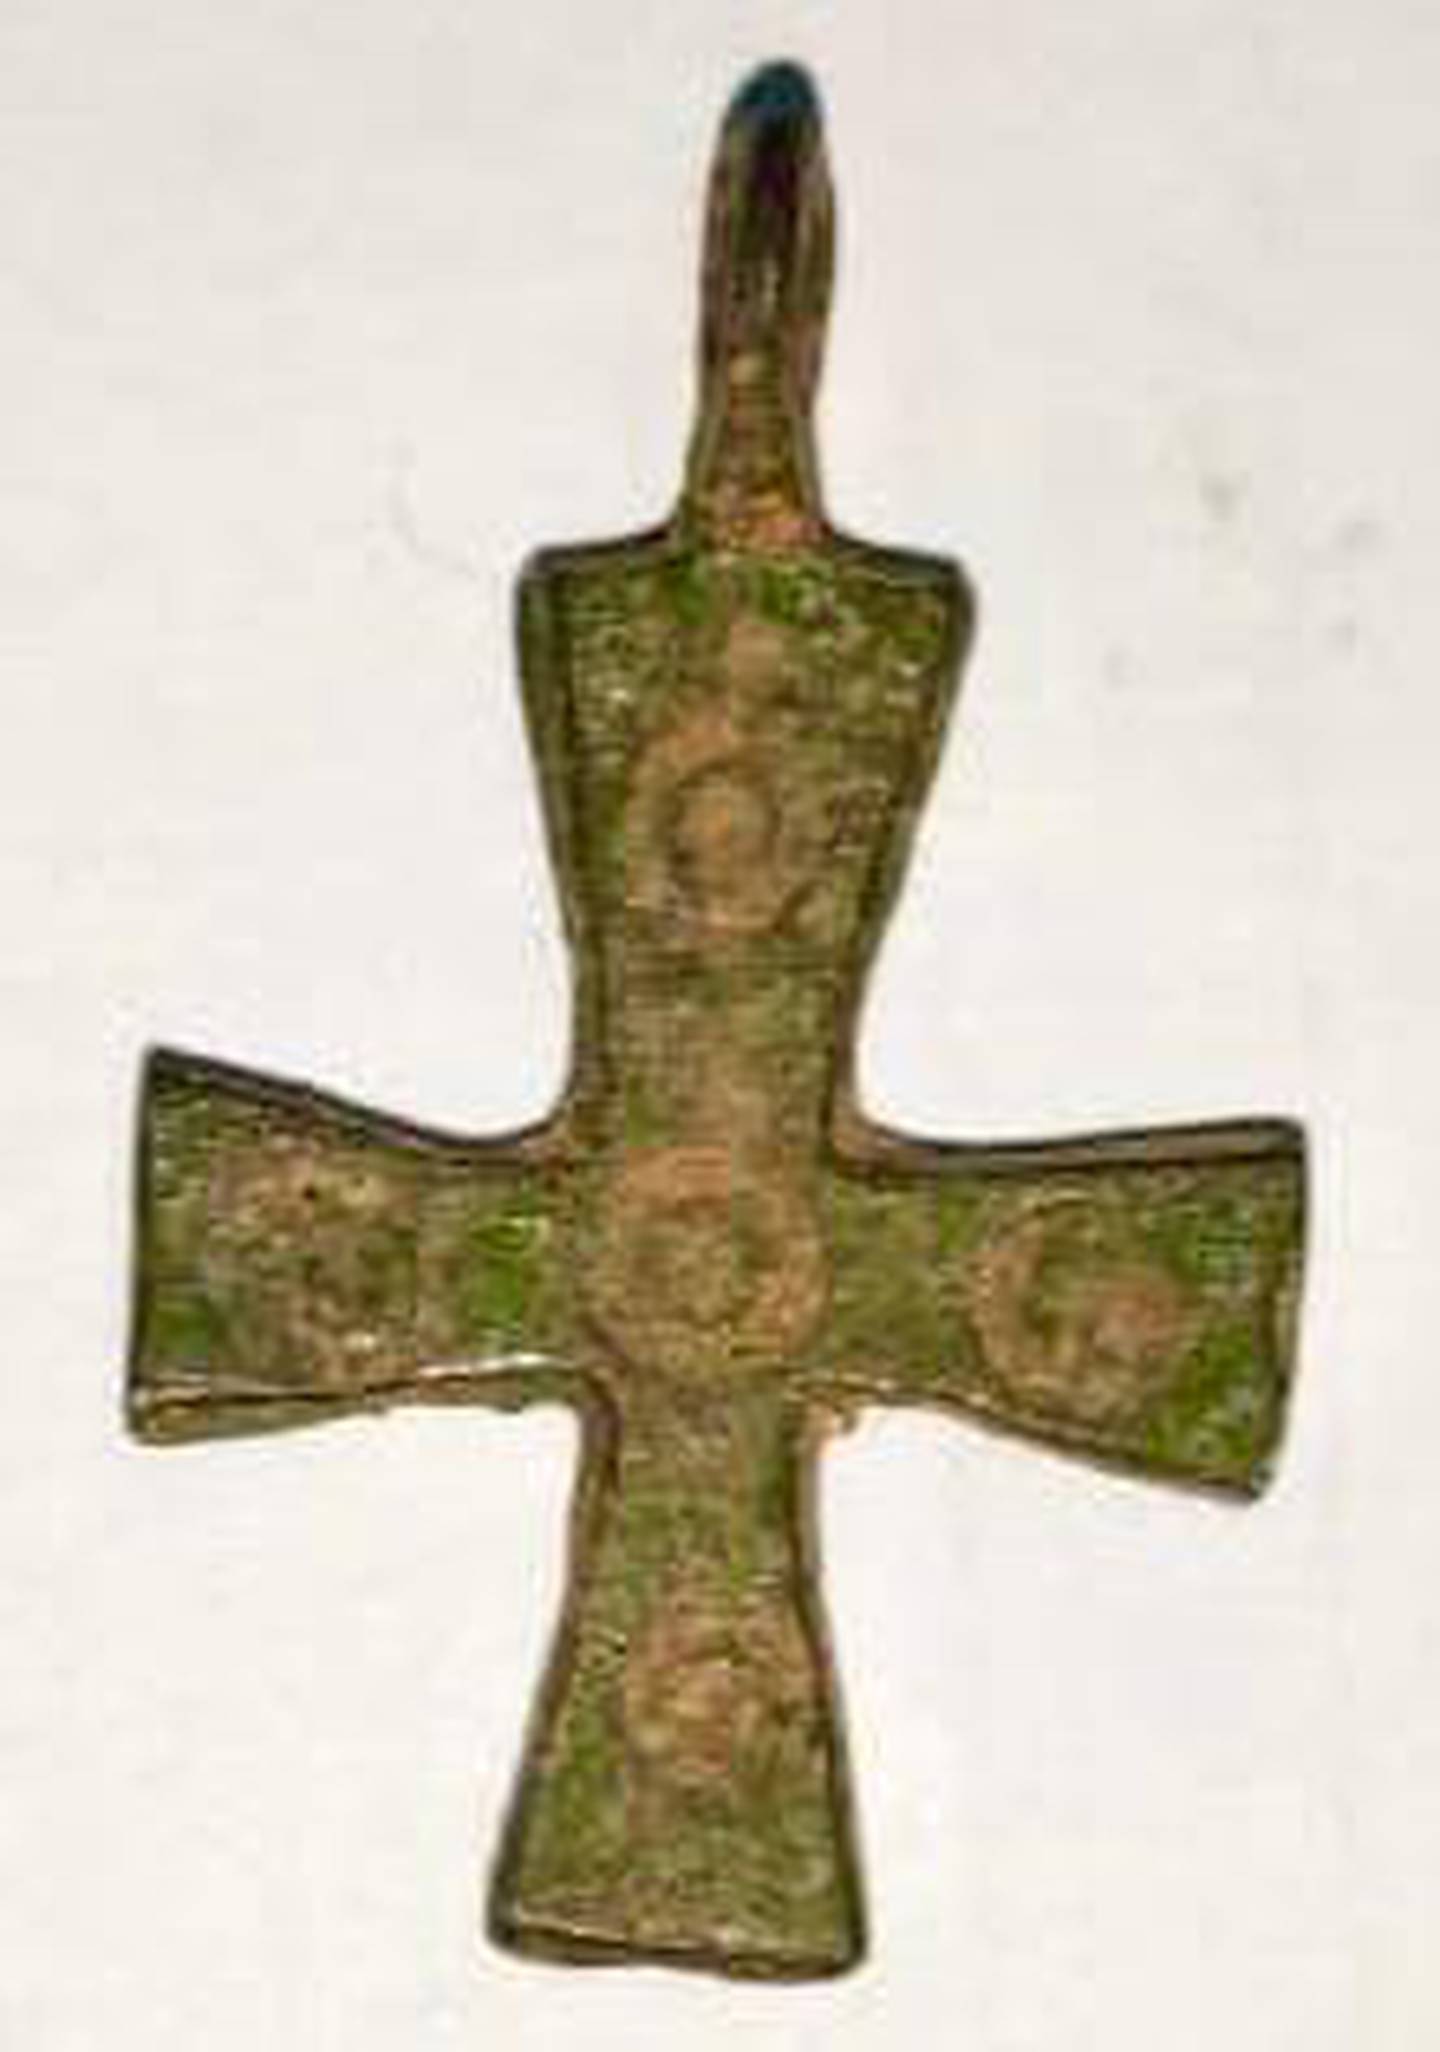 A              Coptic cross found among a group of antiquities seized by              Egyptian police at Cairo International Airport on March 1,              2022. The items were being smuggled out of Egypt by a              traveller. Photo: Ministry of Tourism & Antiquities